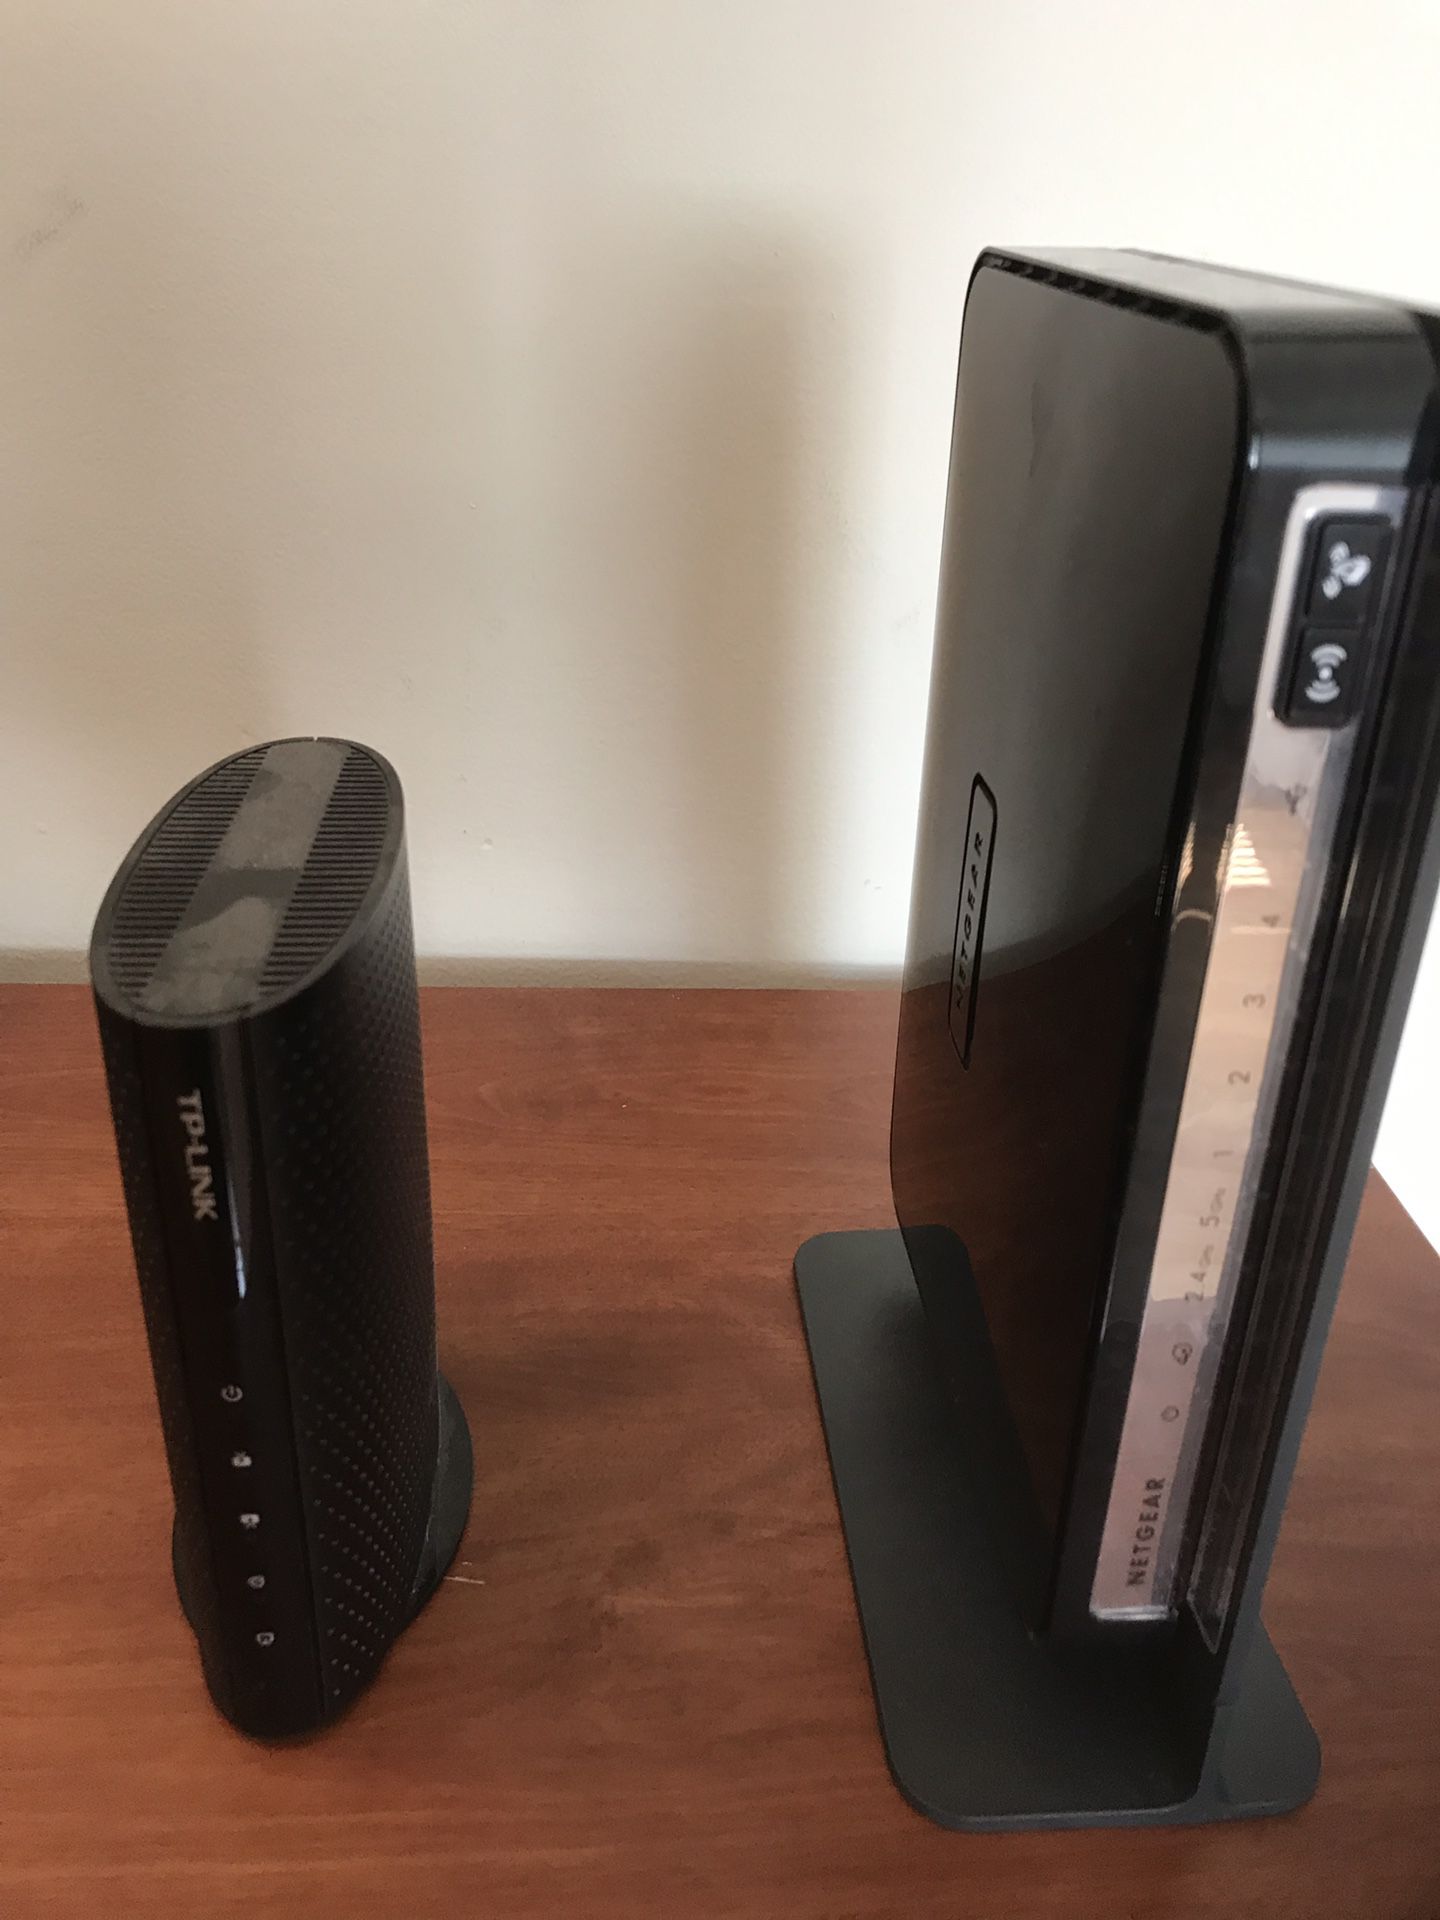 Netgear wifi modem and TP link router for cable